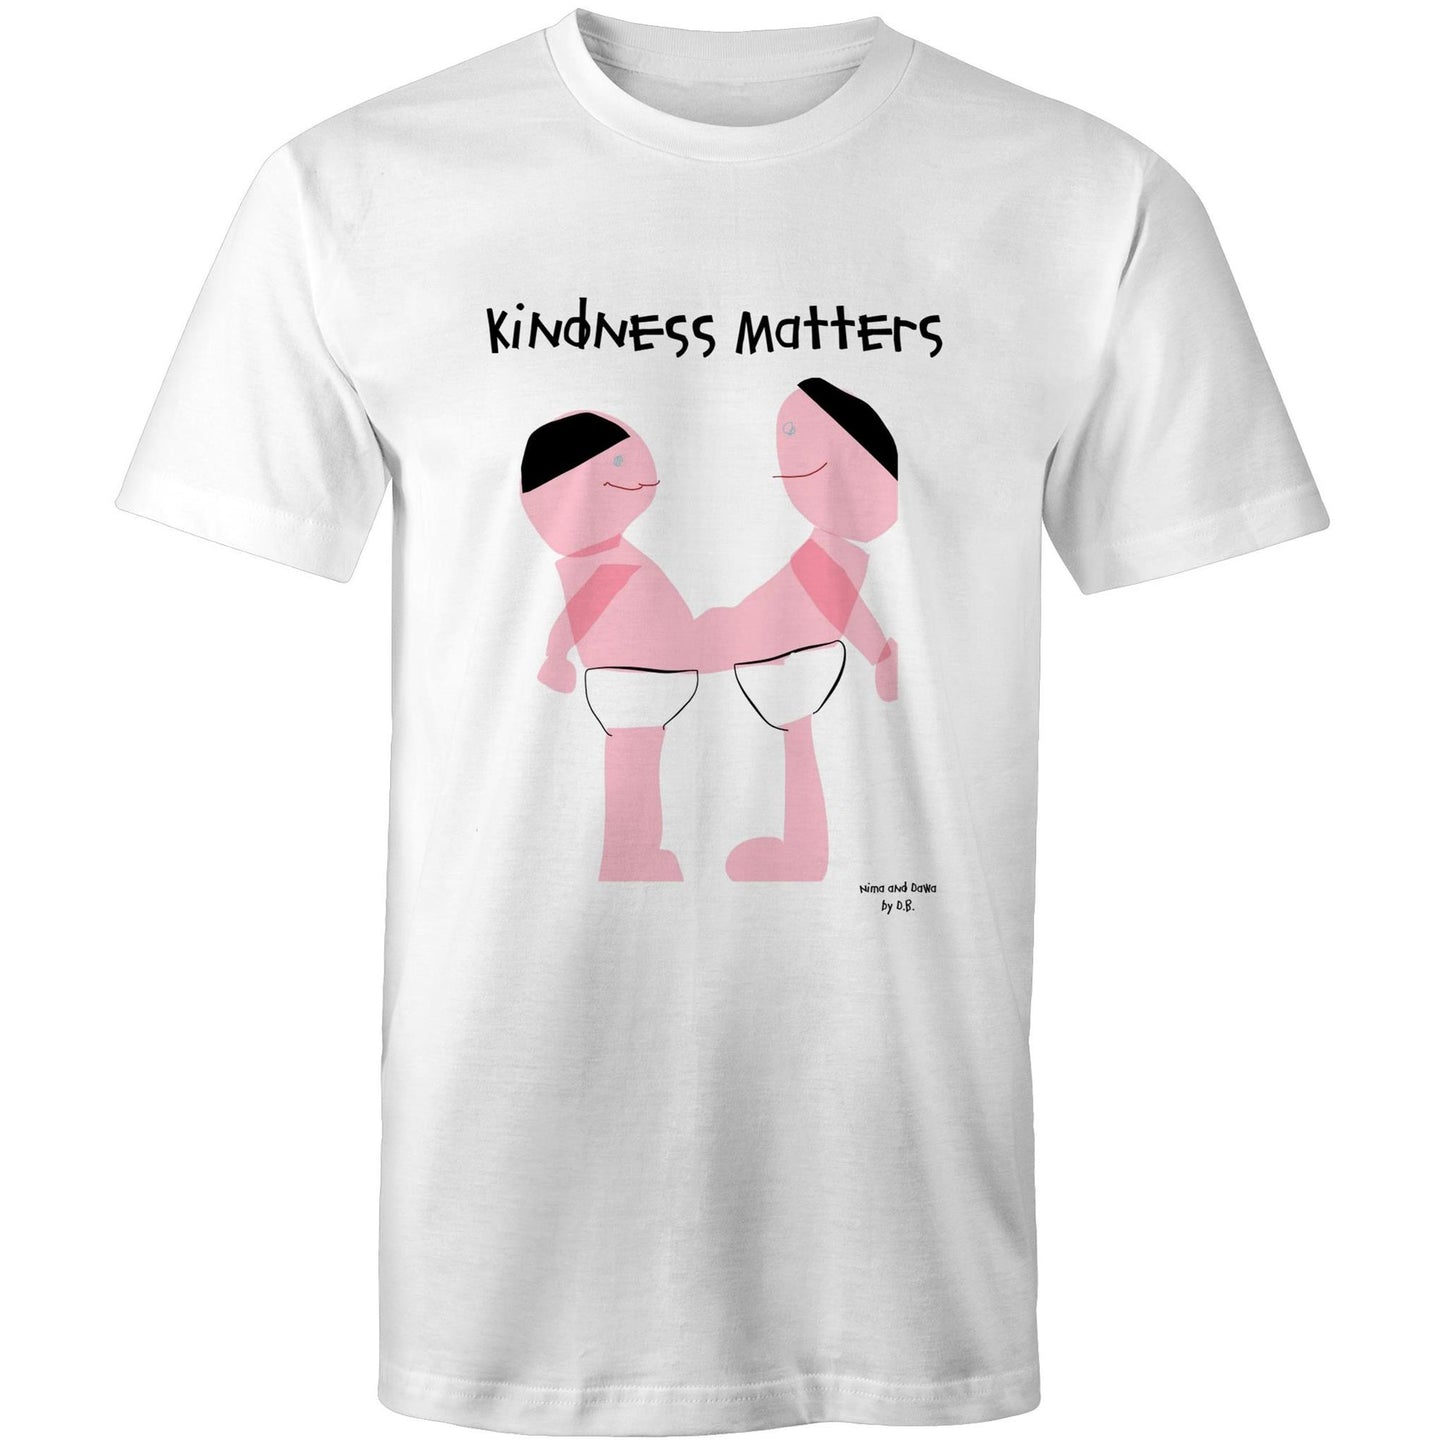 Kindness Matters front and back printed Tee, Nima and Dawa by DB Art printed on Unisex Softstyle T-Shirt